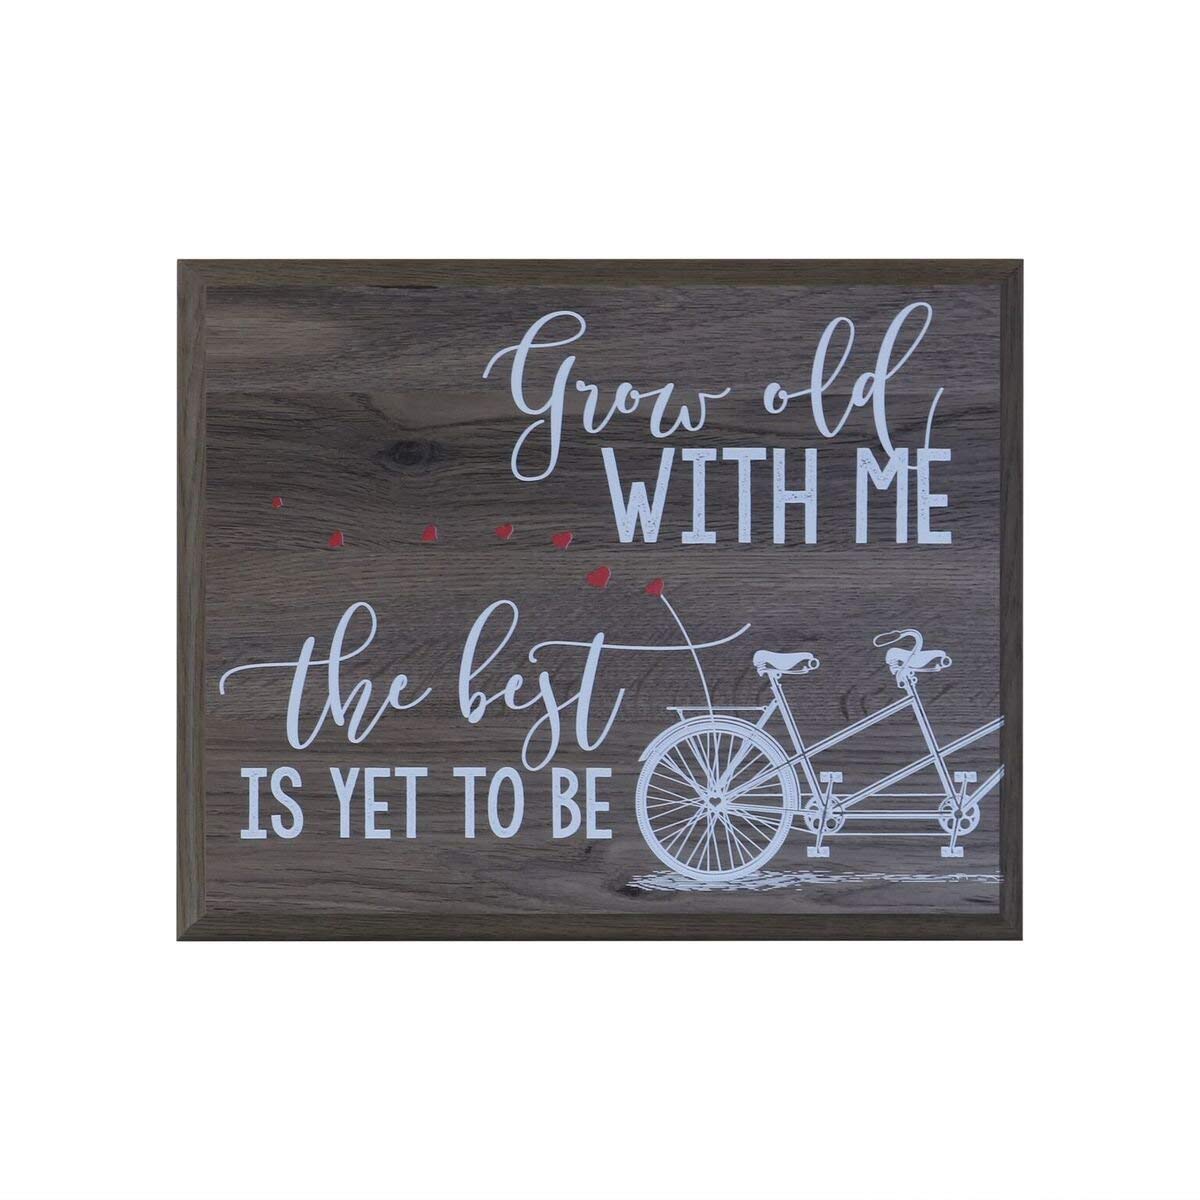 12 x 15 Wall Plaque Decor - Grow Old With Me - LifeSong Milestones